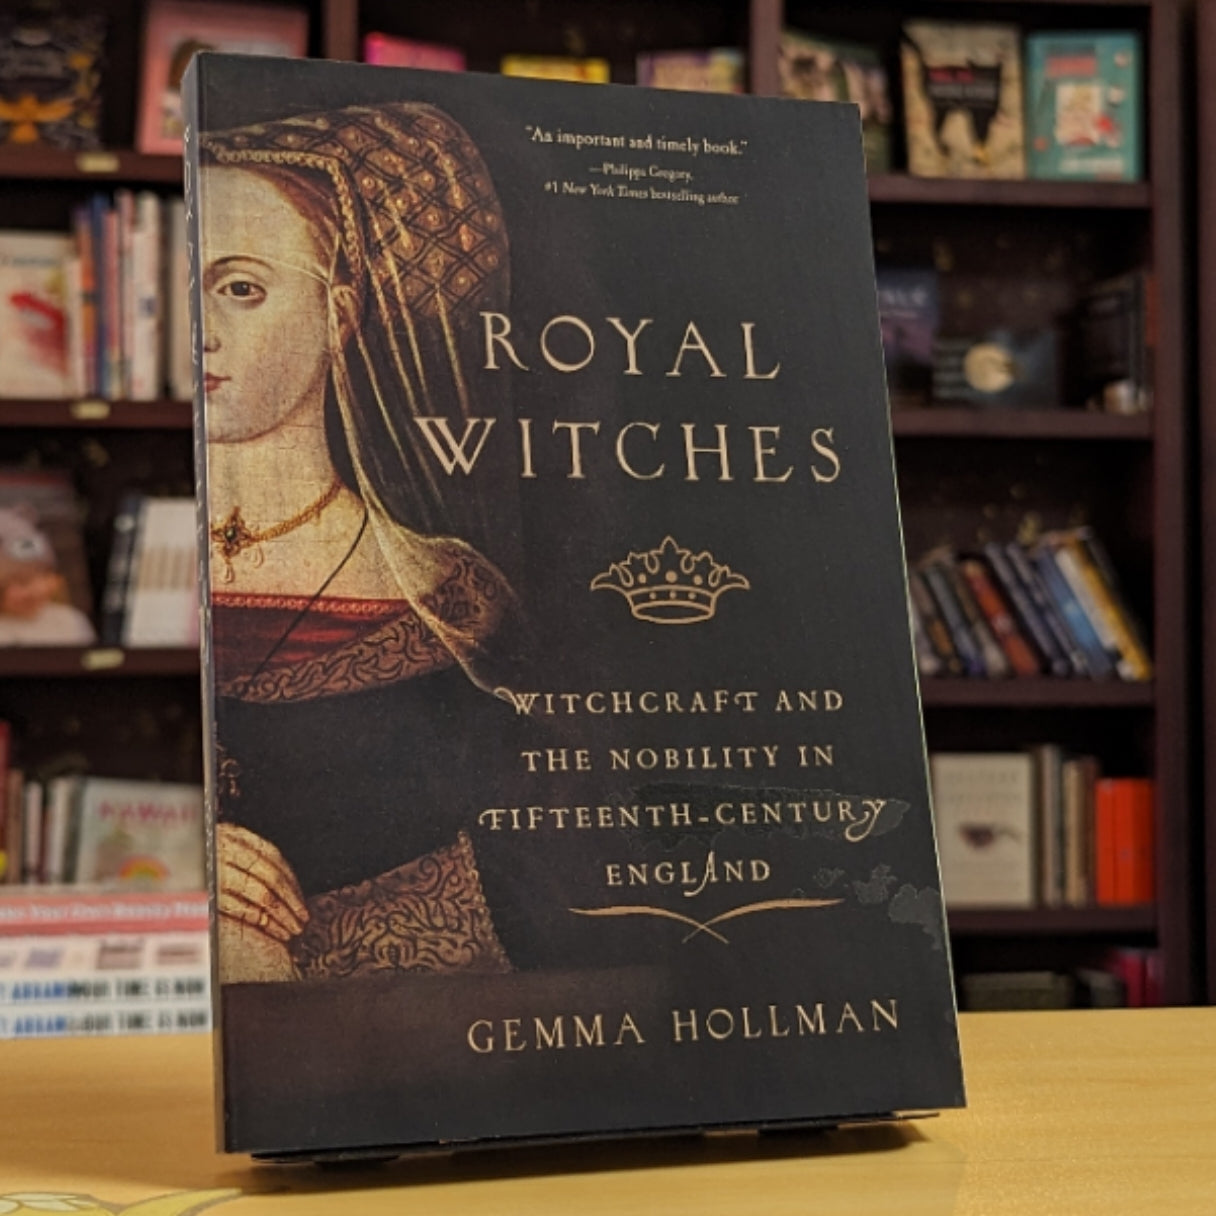 Royal Witches: Witchcraft and the Nobility in Fifteenth-Century England